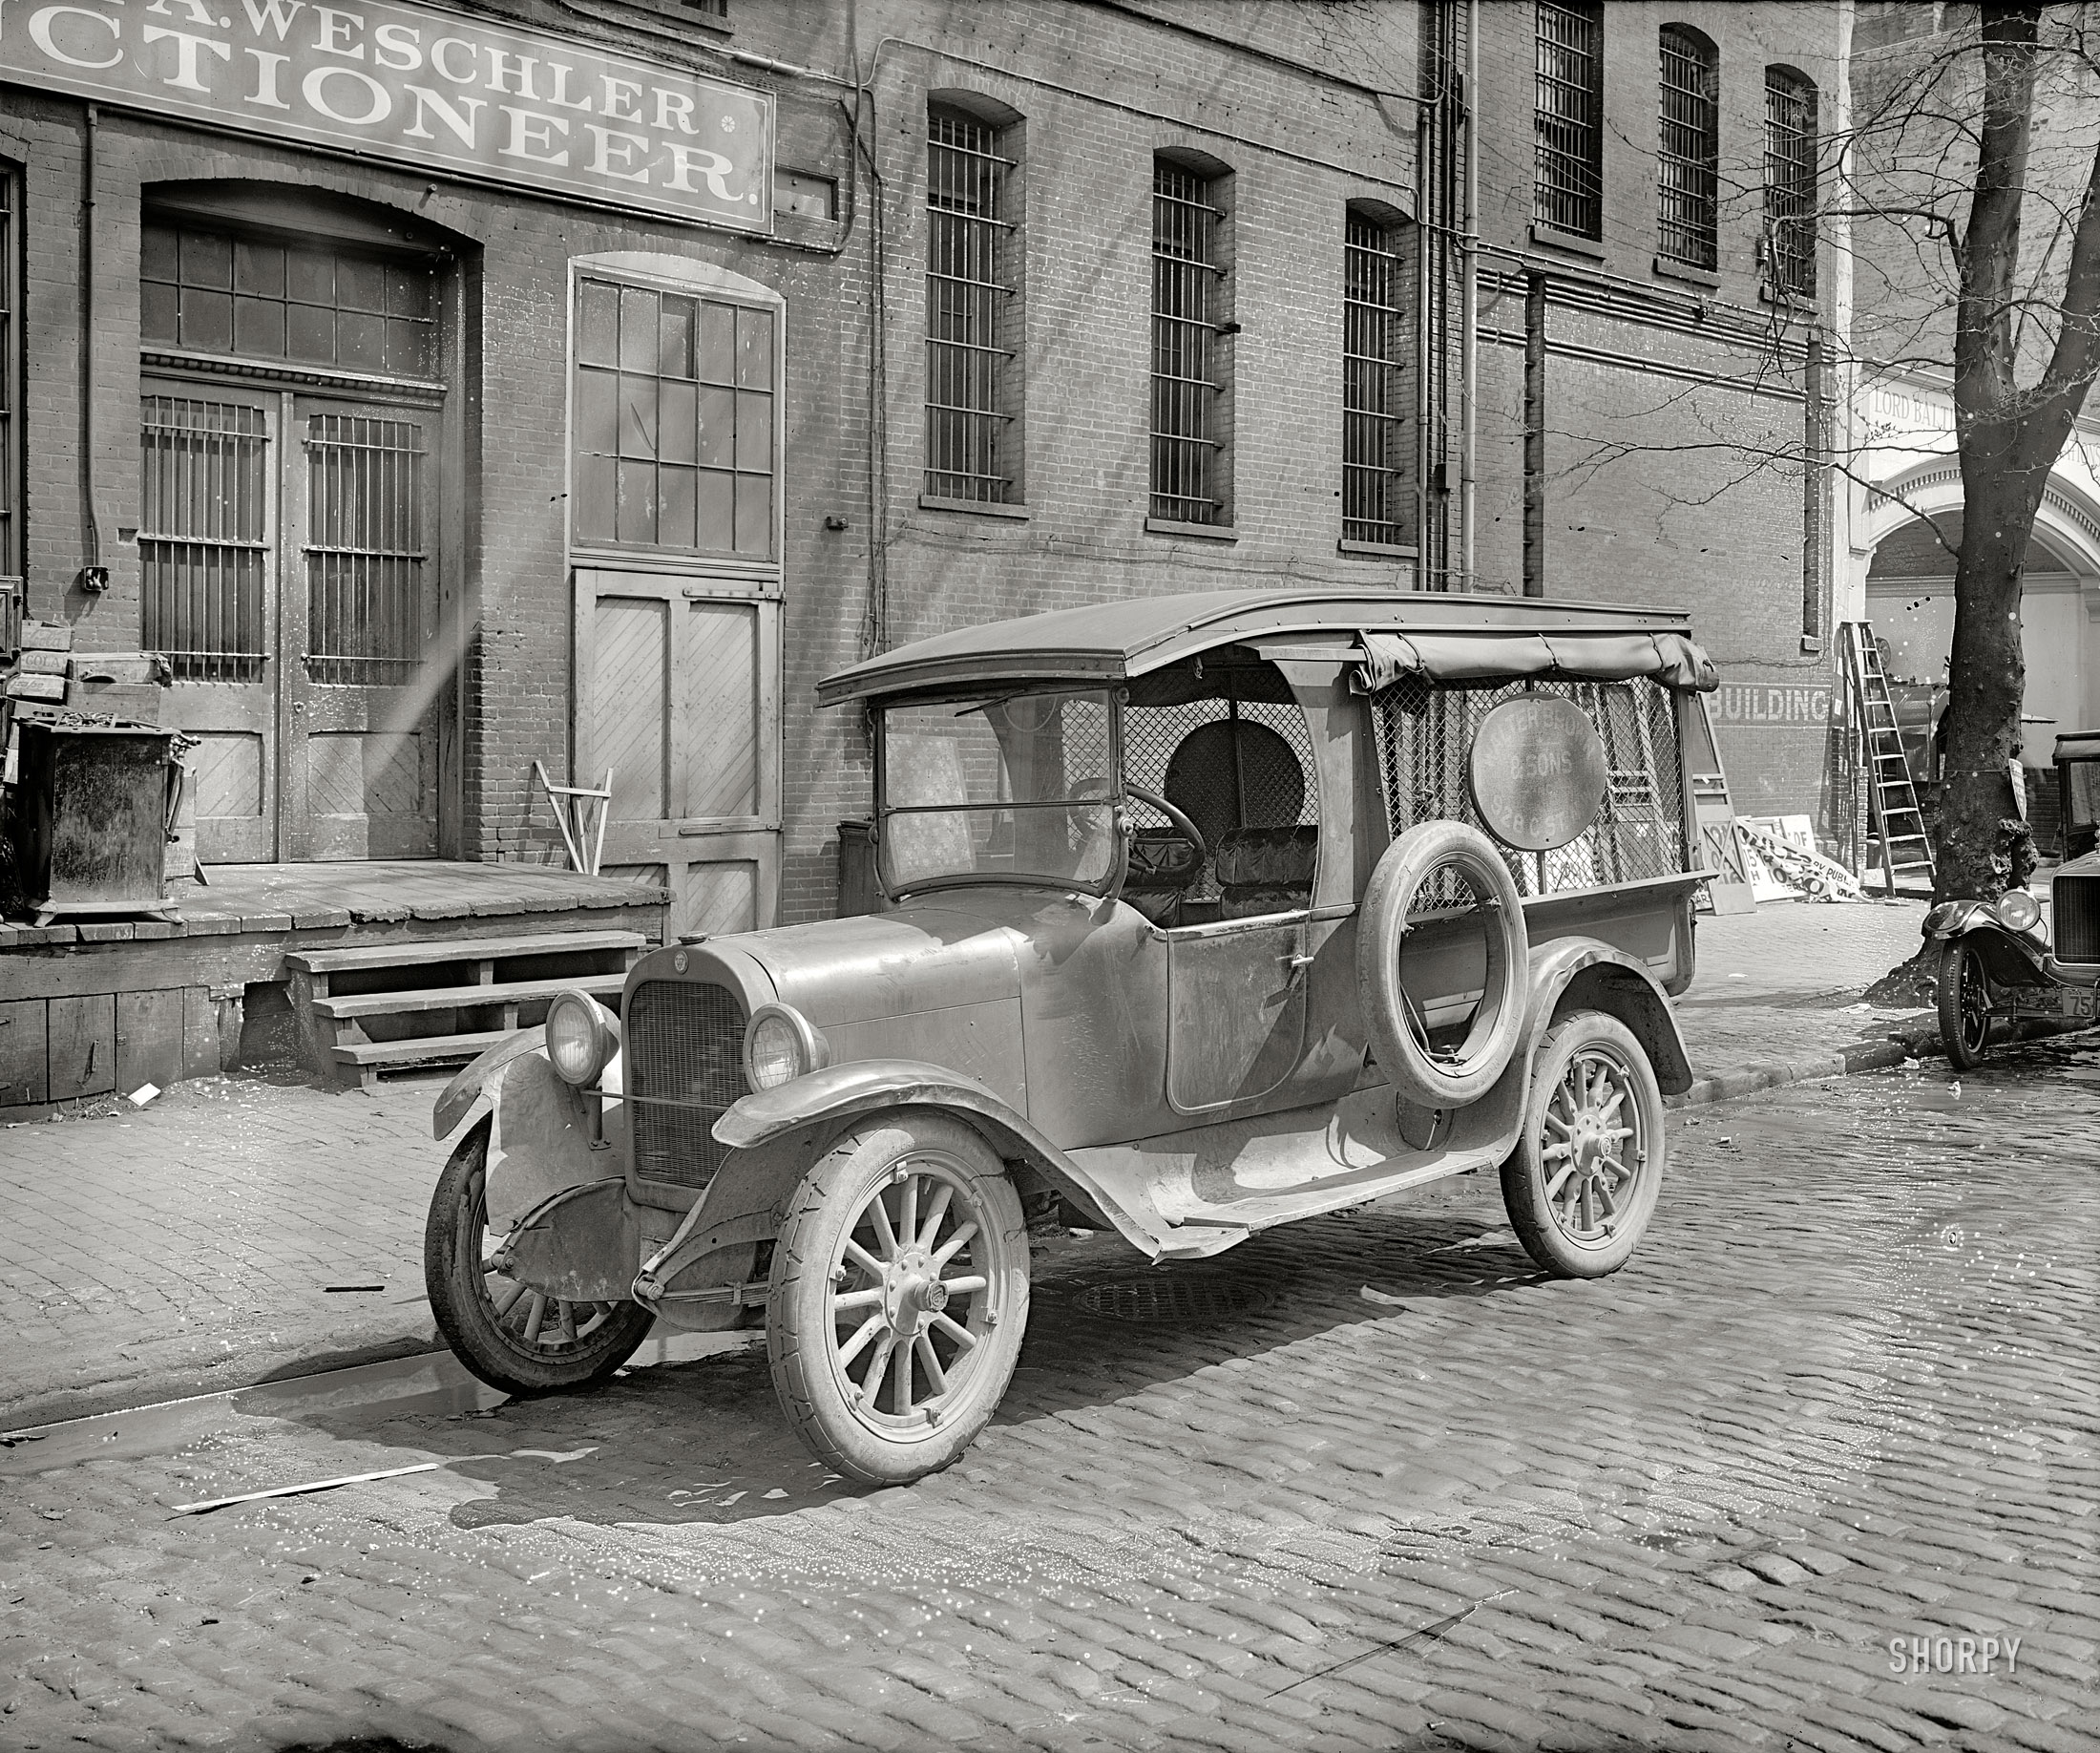 1926. "Semmes Motor Co. truck, Walter Brown & Sons." Another from National Photo's series of Washington, D.C., working trucks. This Dodge's battered body notwithstanding, motor trucks were a relative newcomer to a workaday world where dray wagons and horse teams had long dominated. View full size.